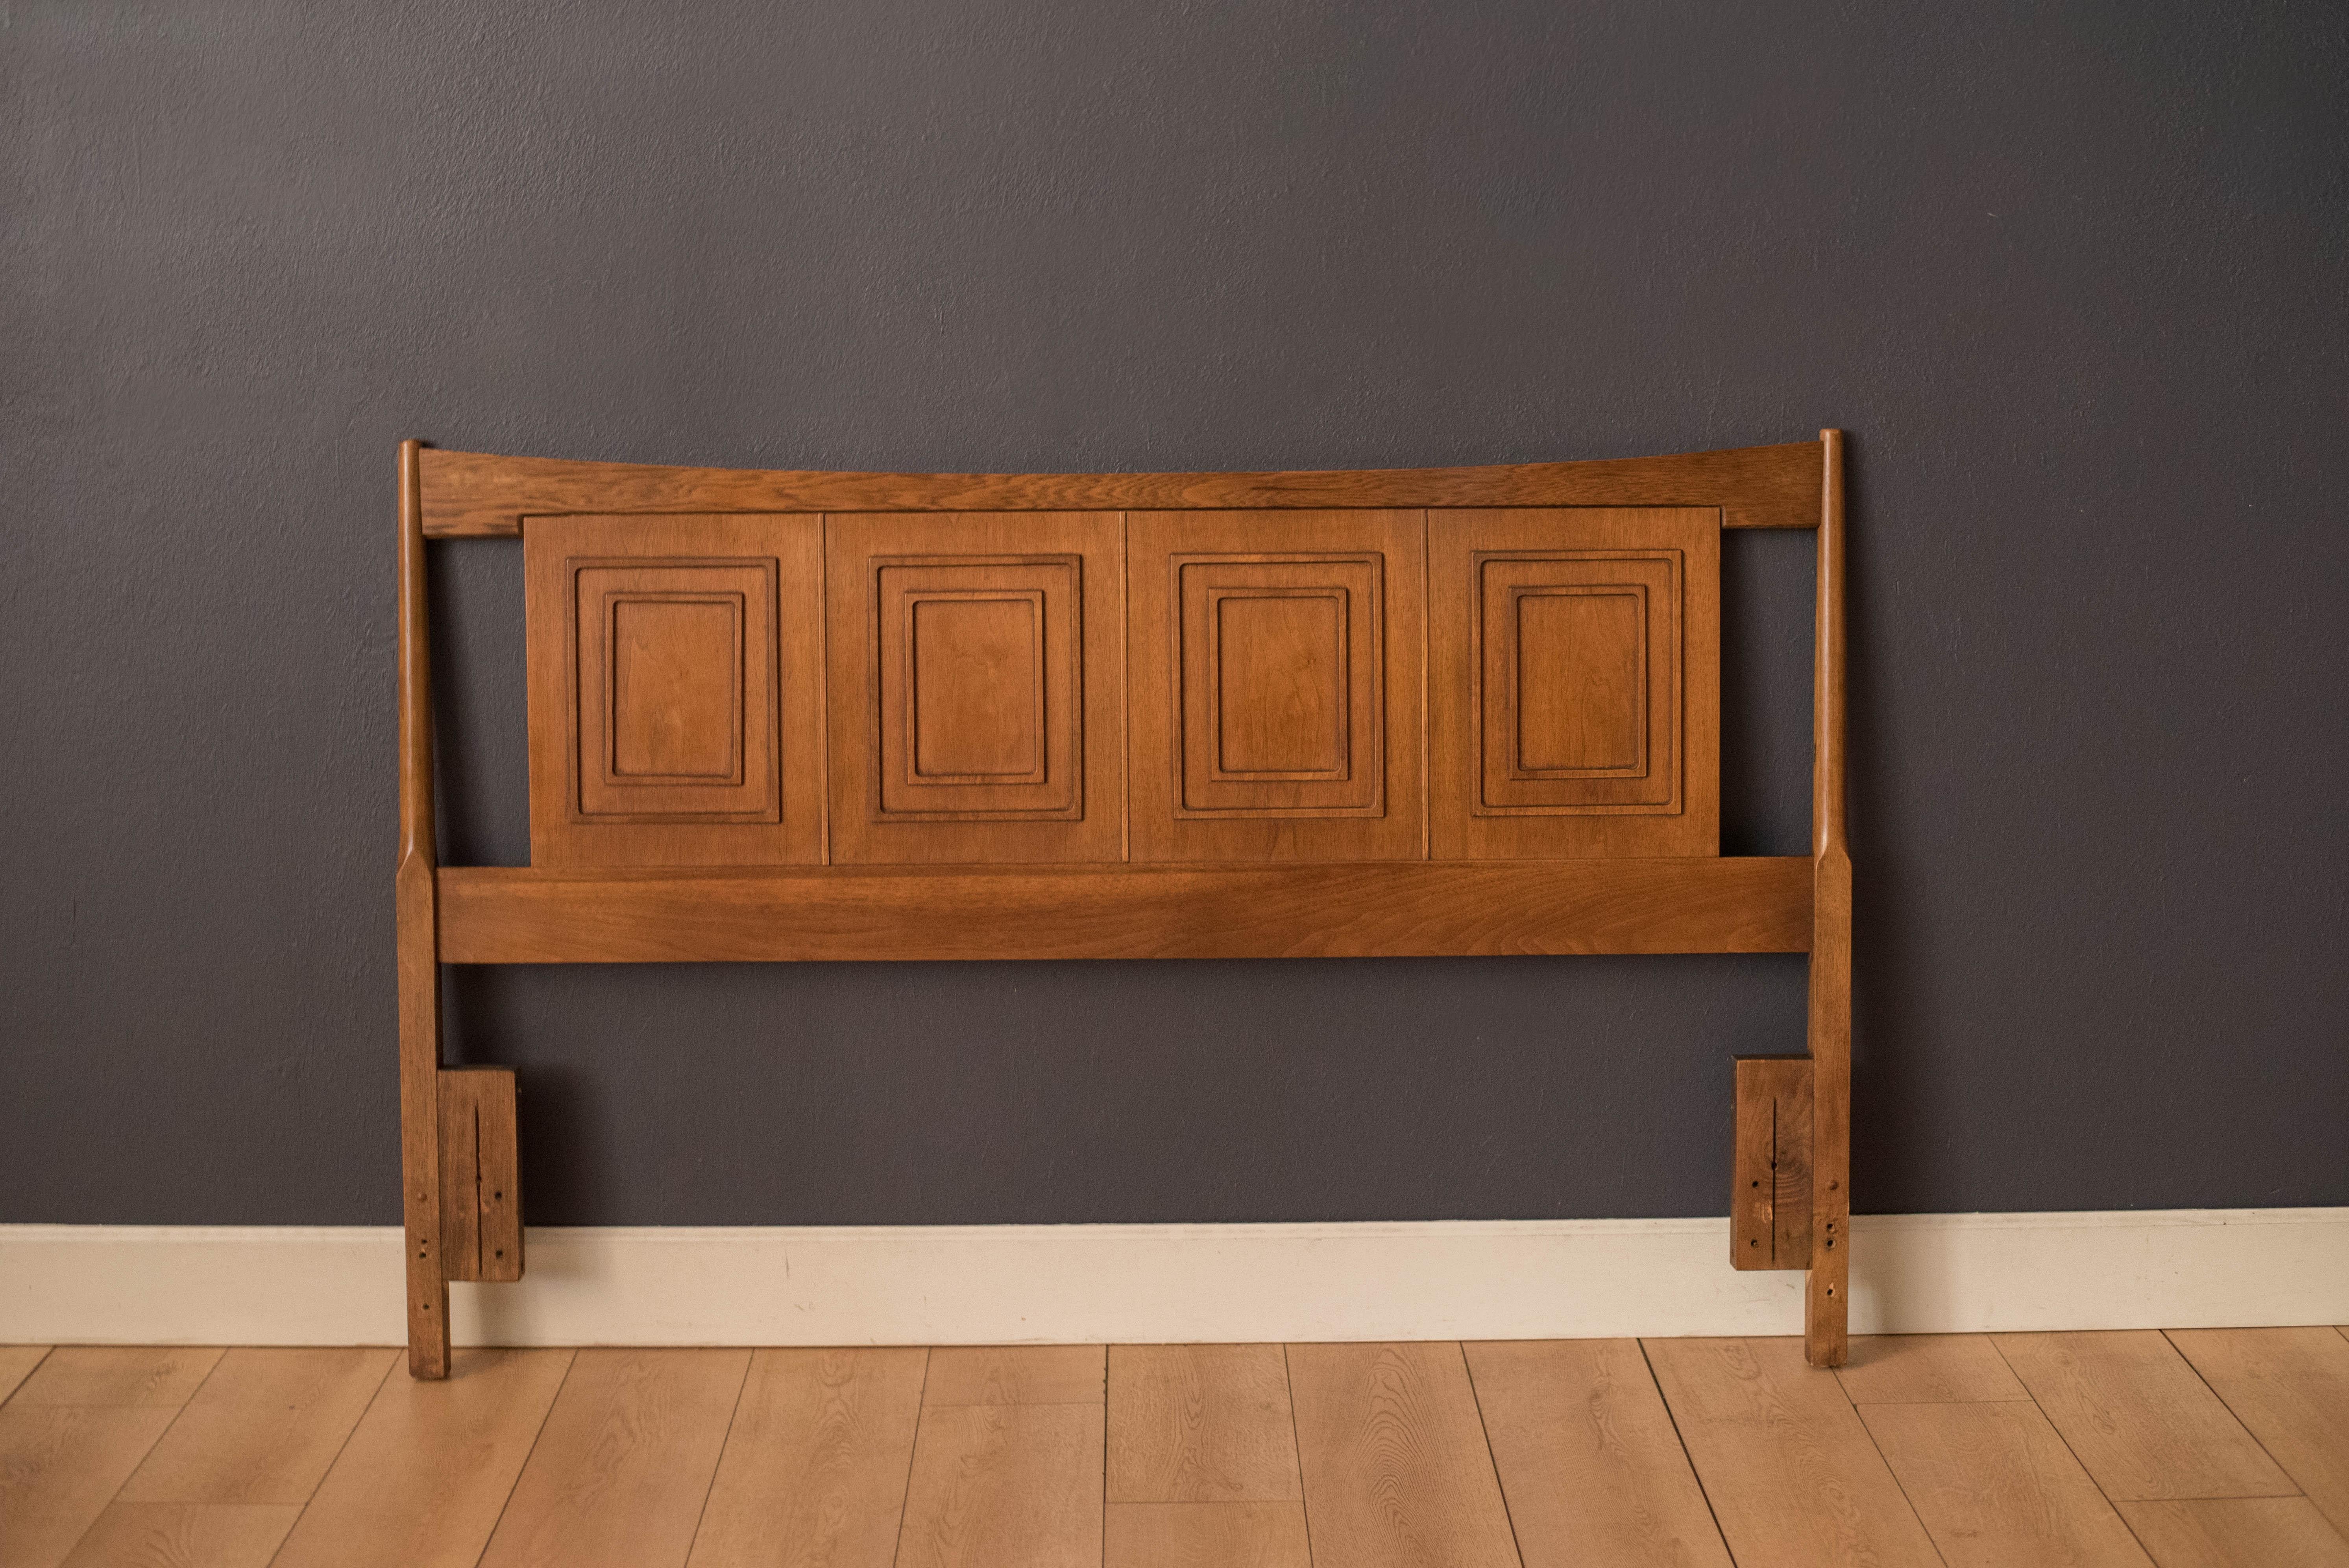 Vintage Broyhill Sculptra queen size headboard in walnut and oak circa 1960's. This piece displays the line's signature inset picture frame design and sculpted arches.